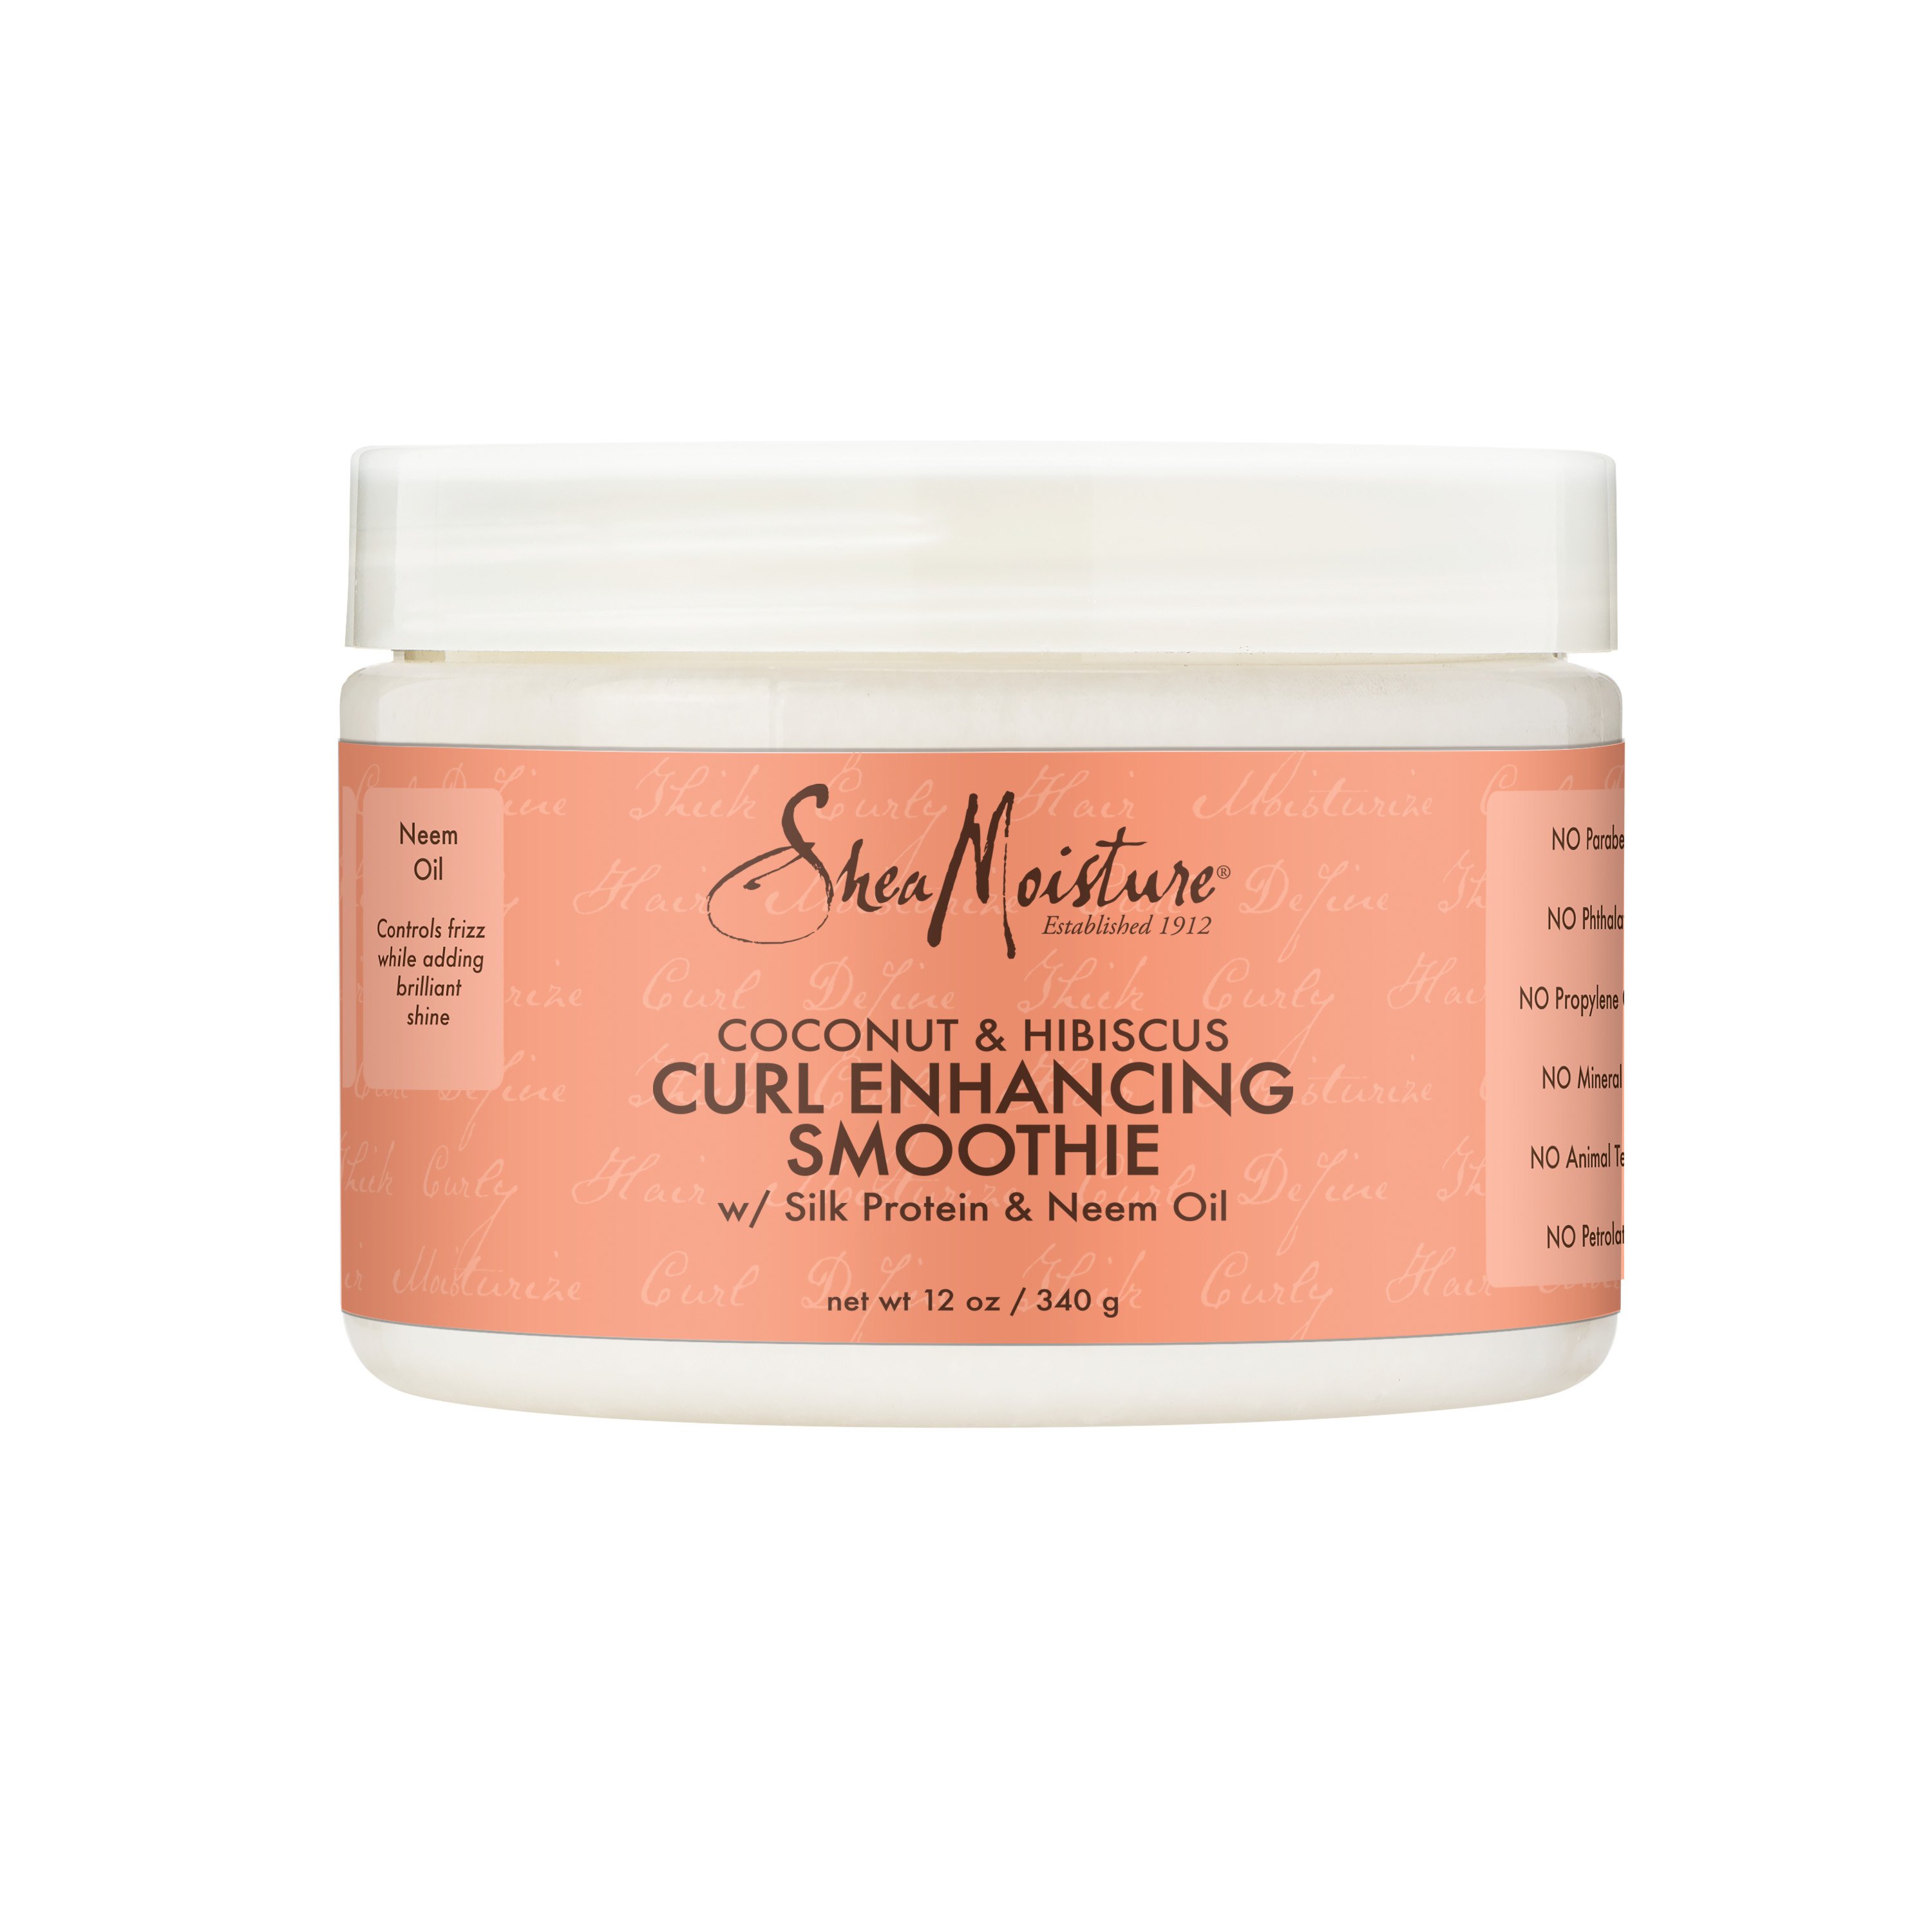 Shea Moisture Curl Enhancing Smoothie Shop Styling Products